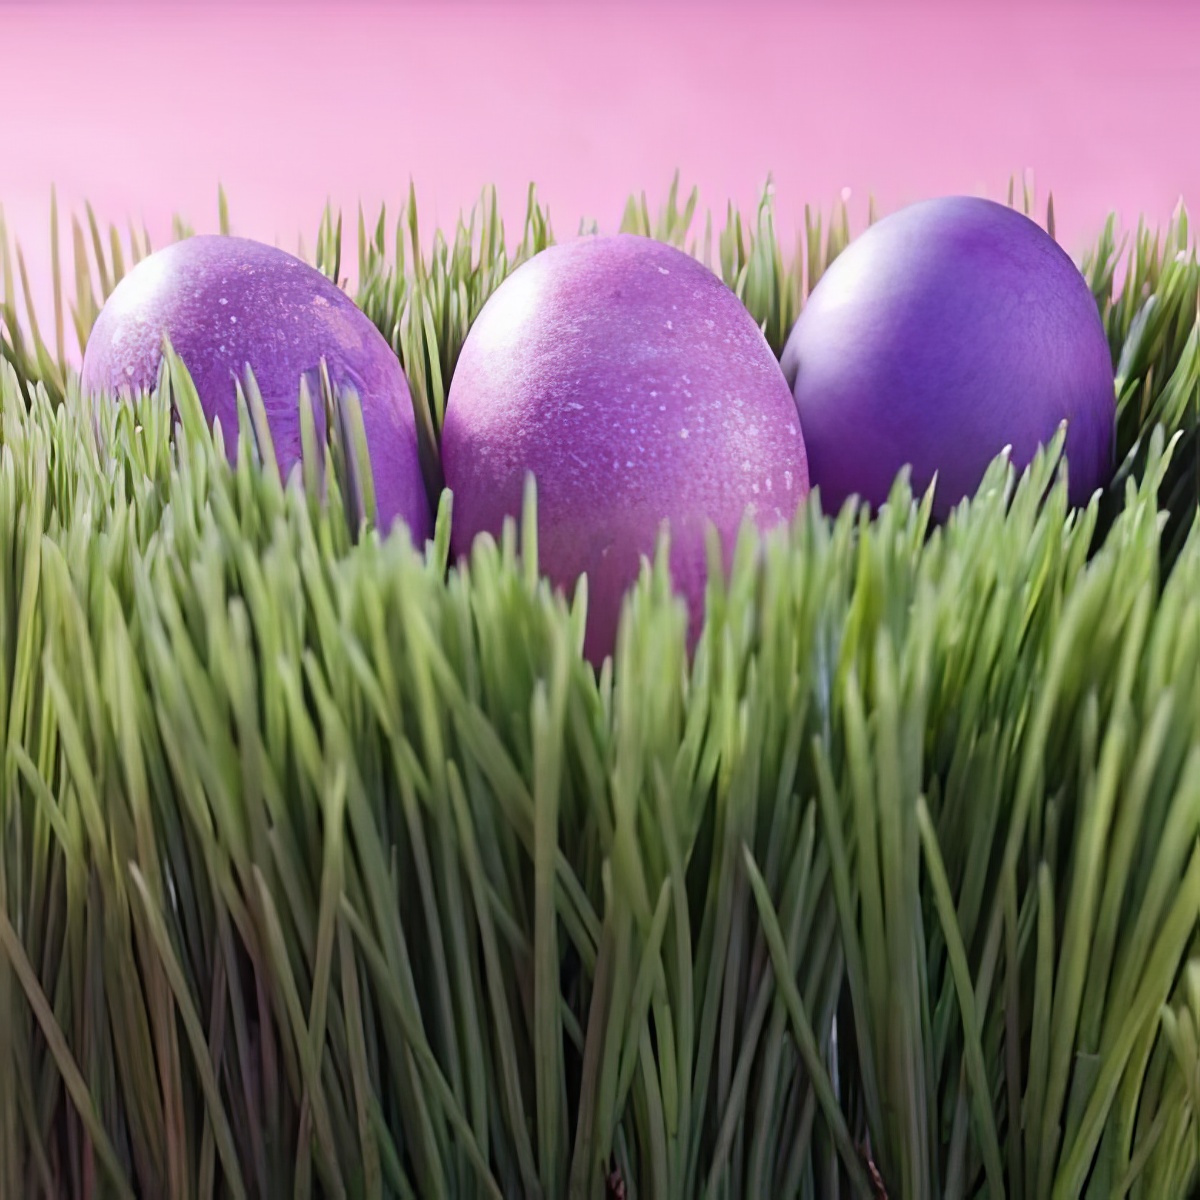 Get awesome and fun ideas on how to hide those Easter eggs that even adults can't find it right away on  your  Easter egg hunt! 